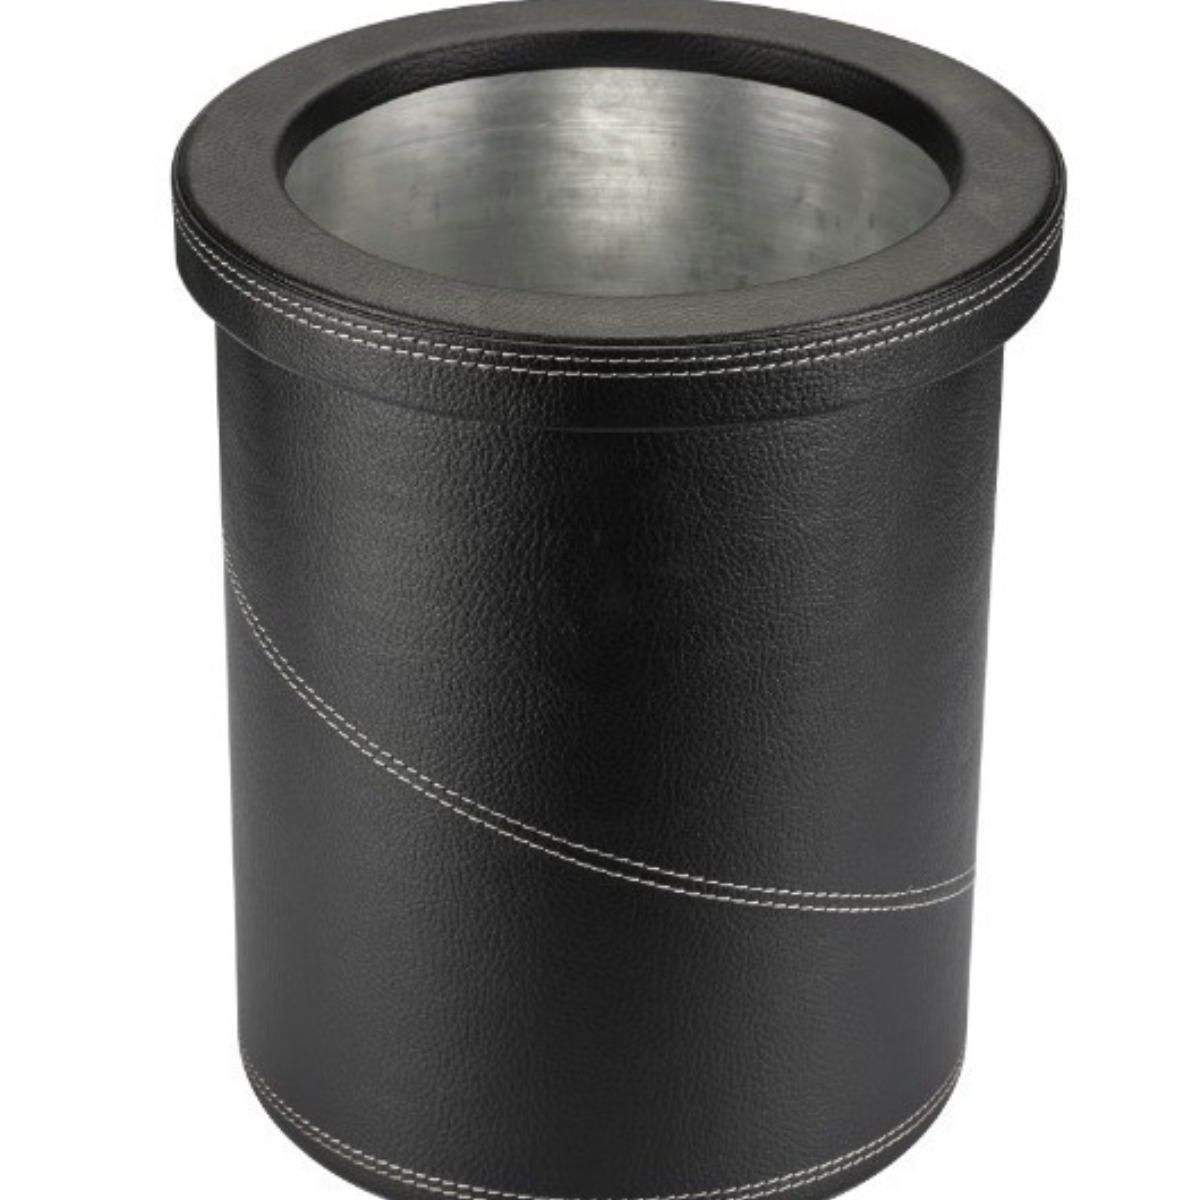 AB-313 Leather Lined Dustbin